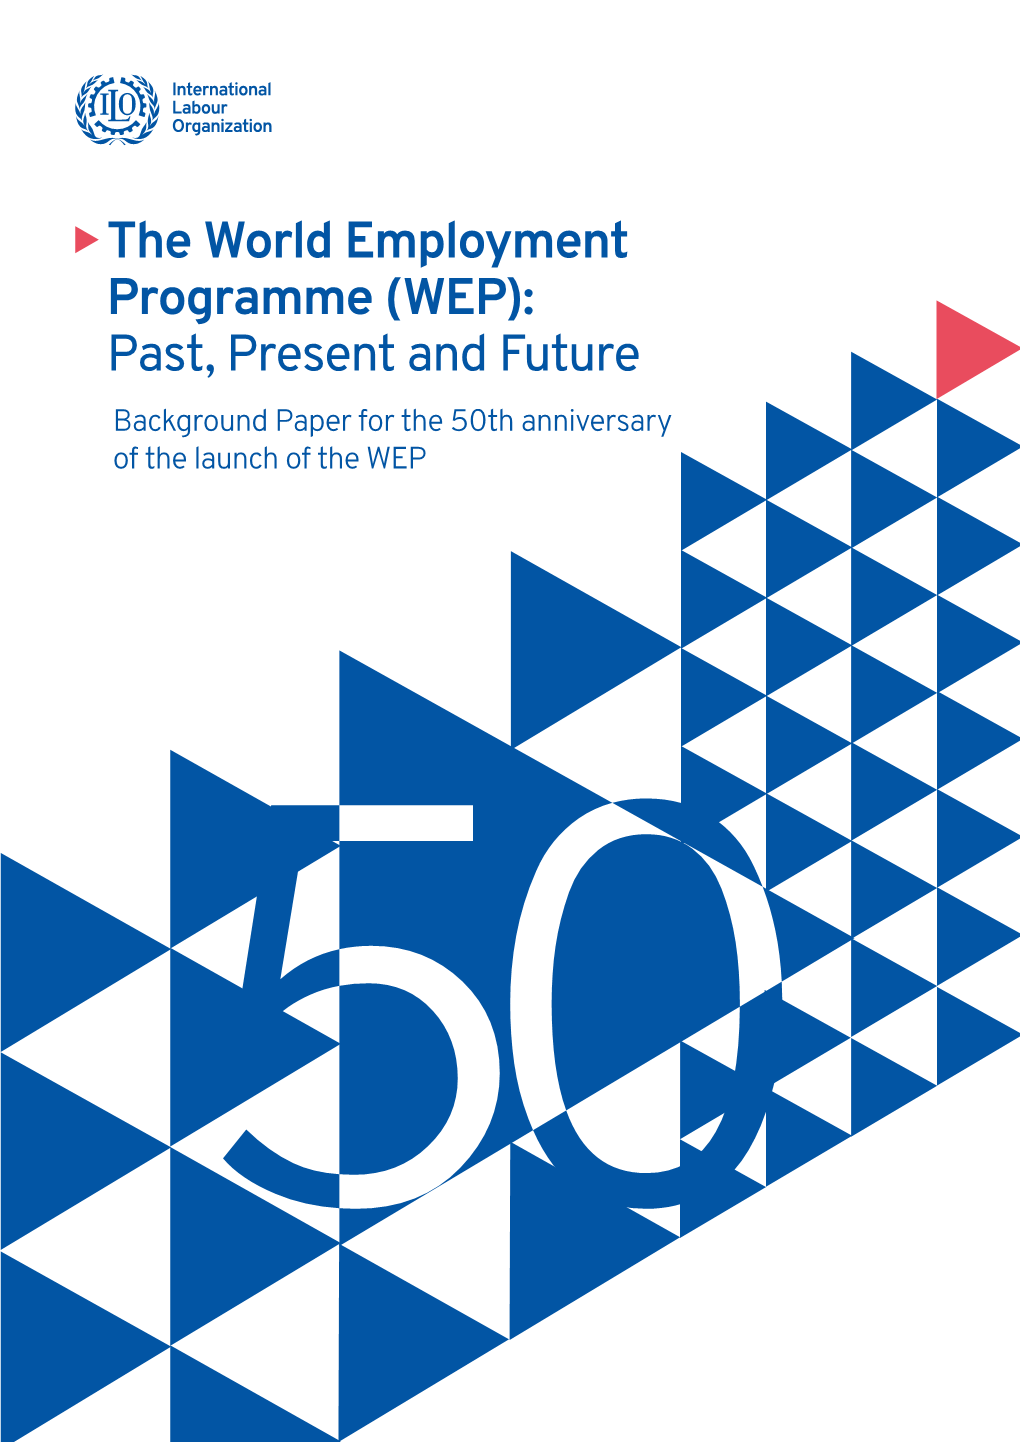 The World Employment Programme (WEP): Past, Present and Future Background Paper for the 50Th Anniversary of the Launch of the WEP